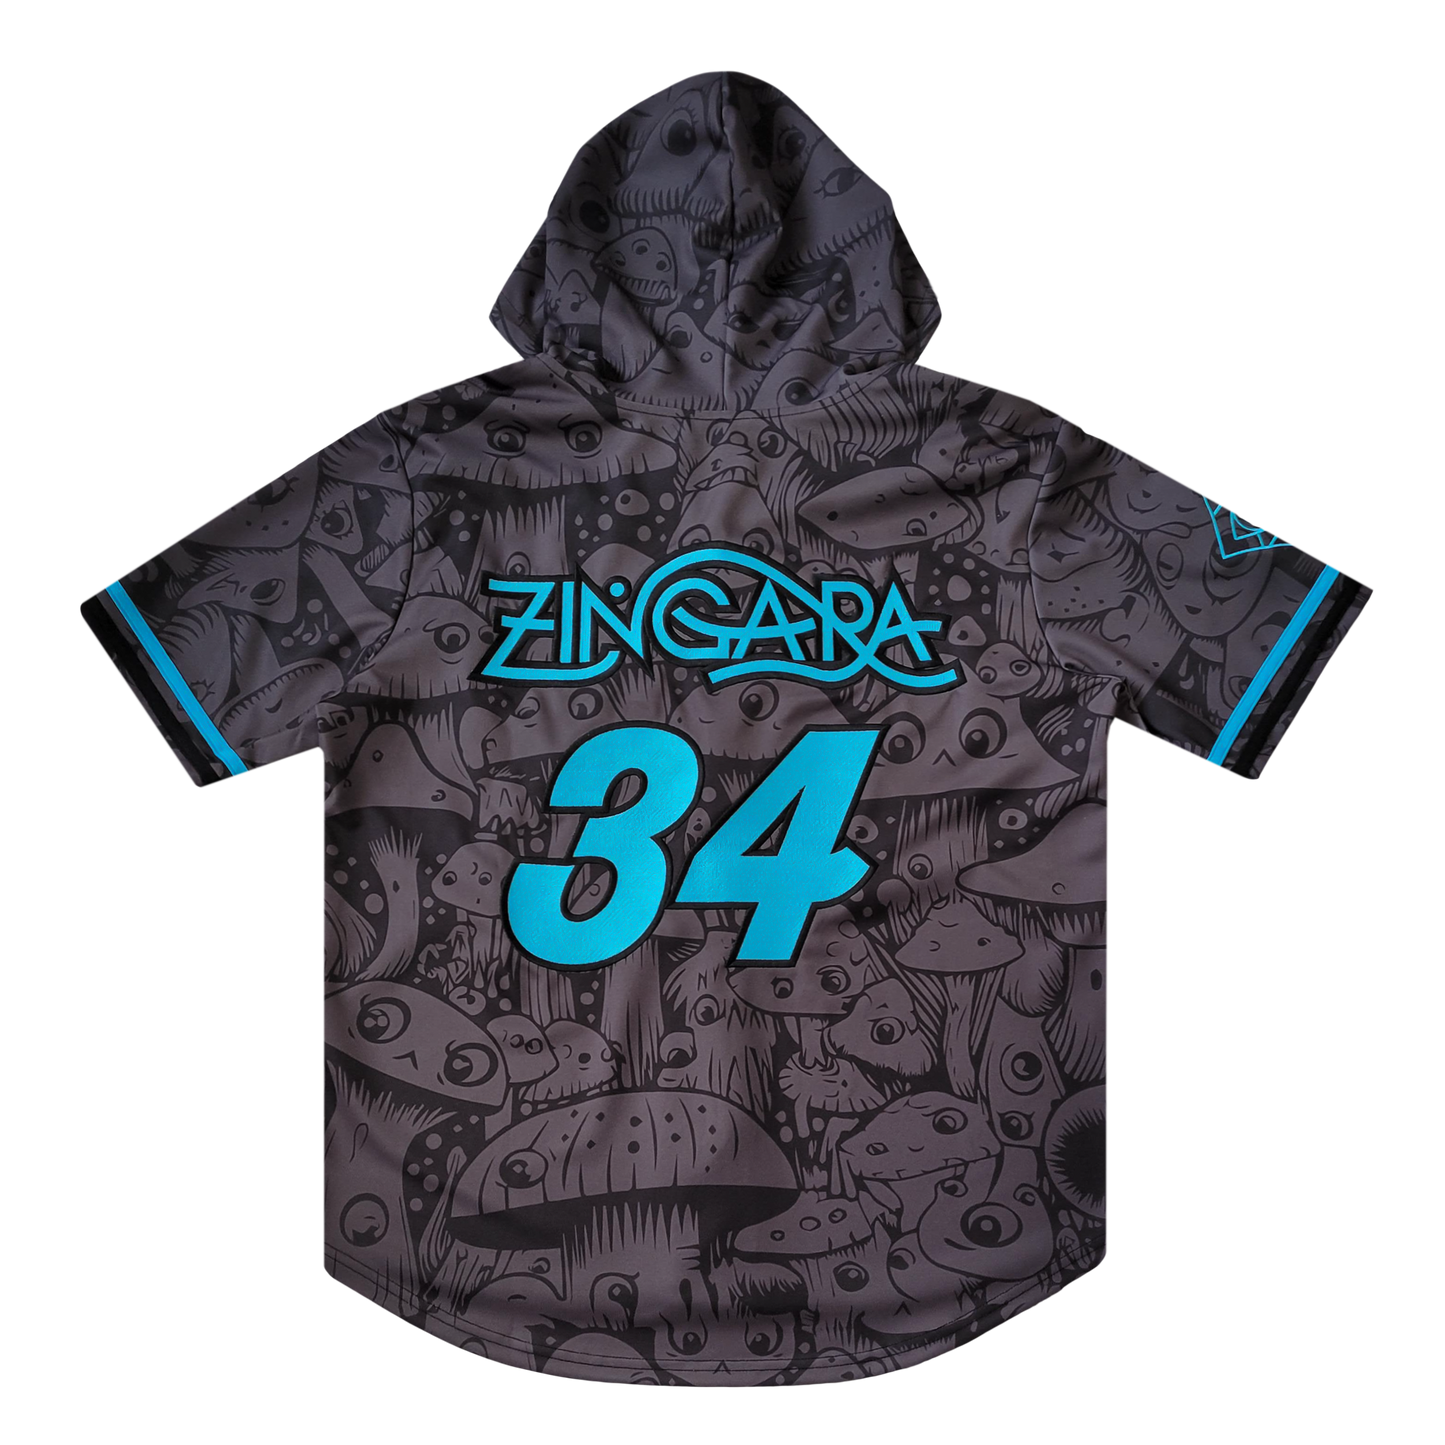 Limited Edition Black / Gray Hooded Baseball Jersey